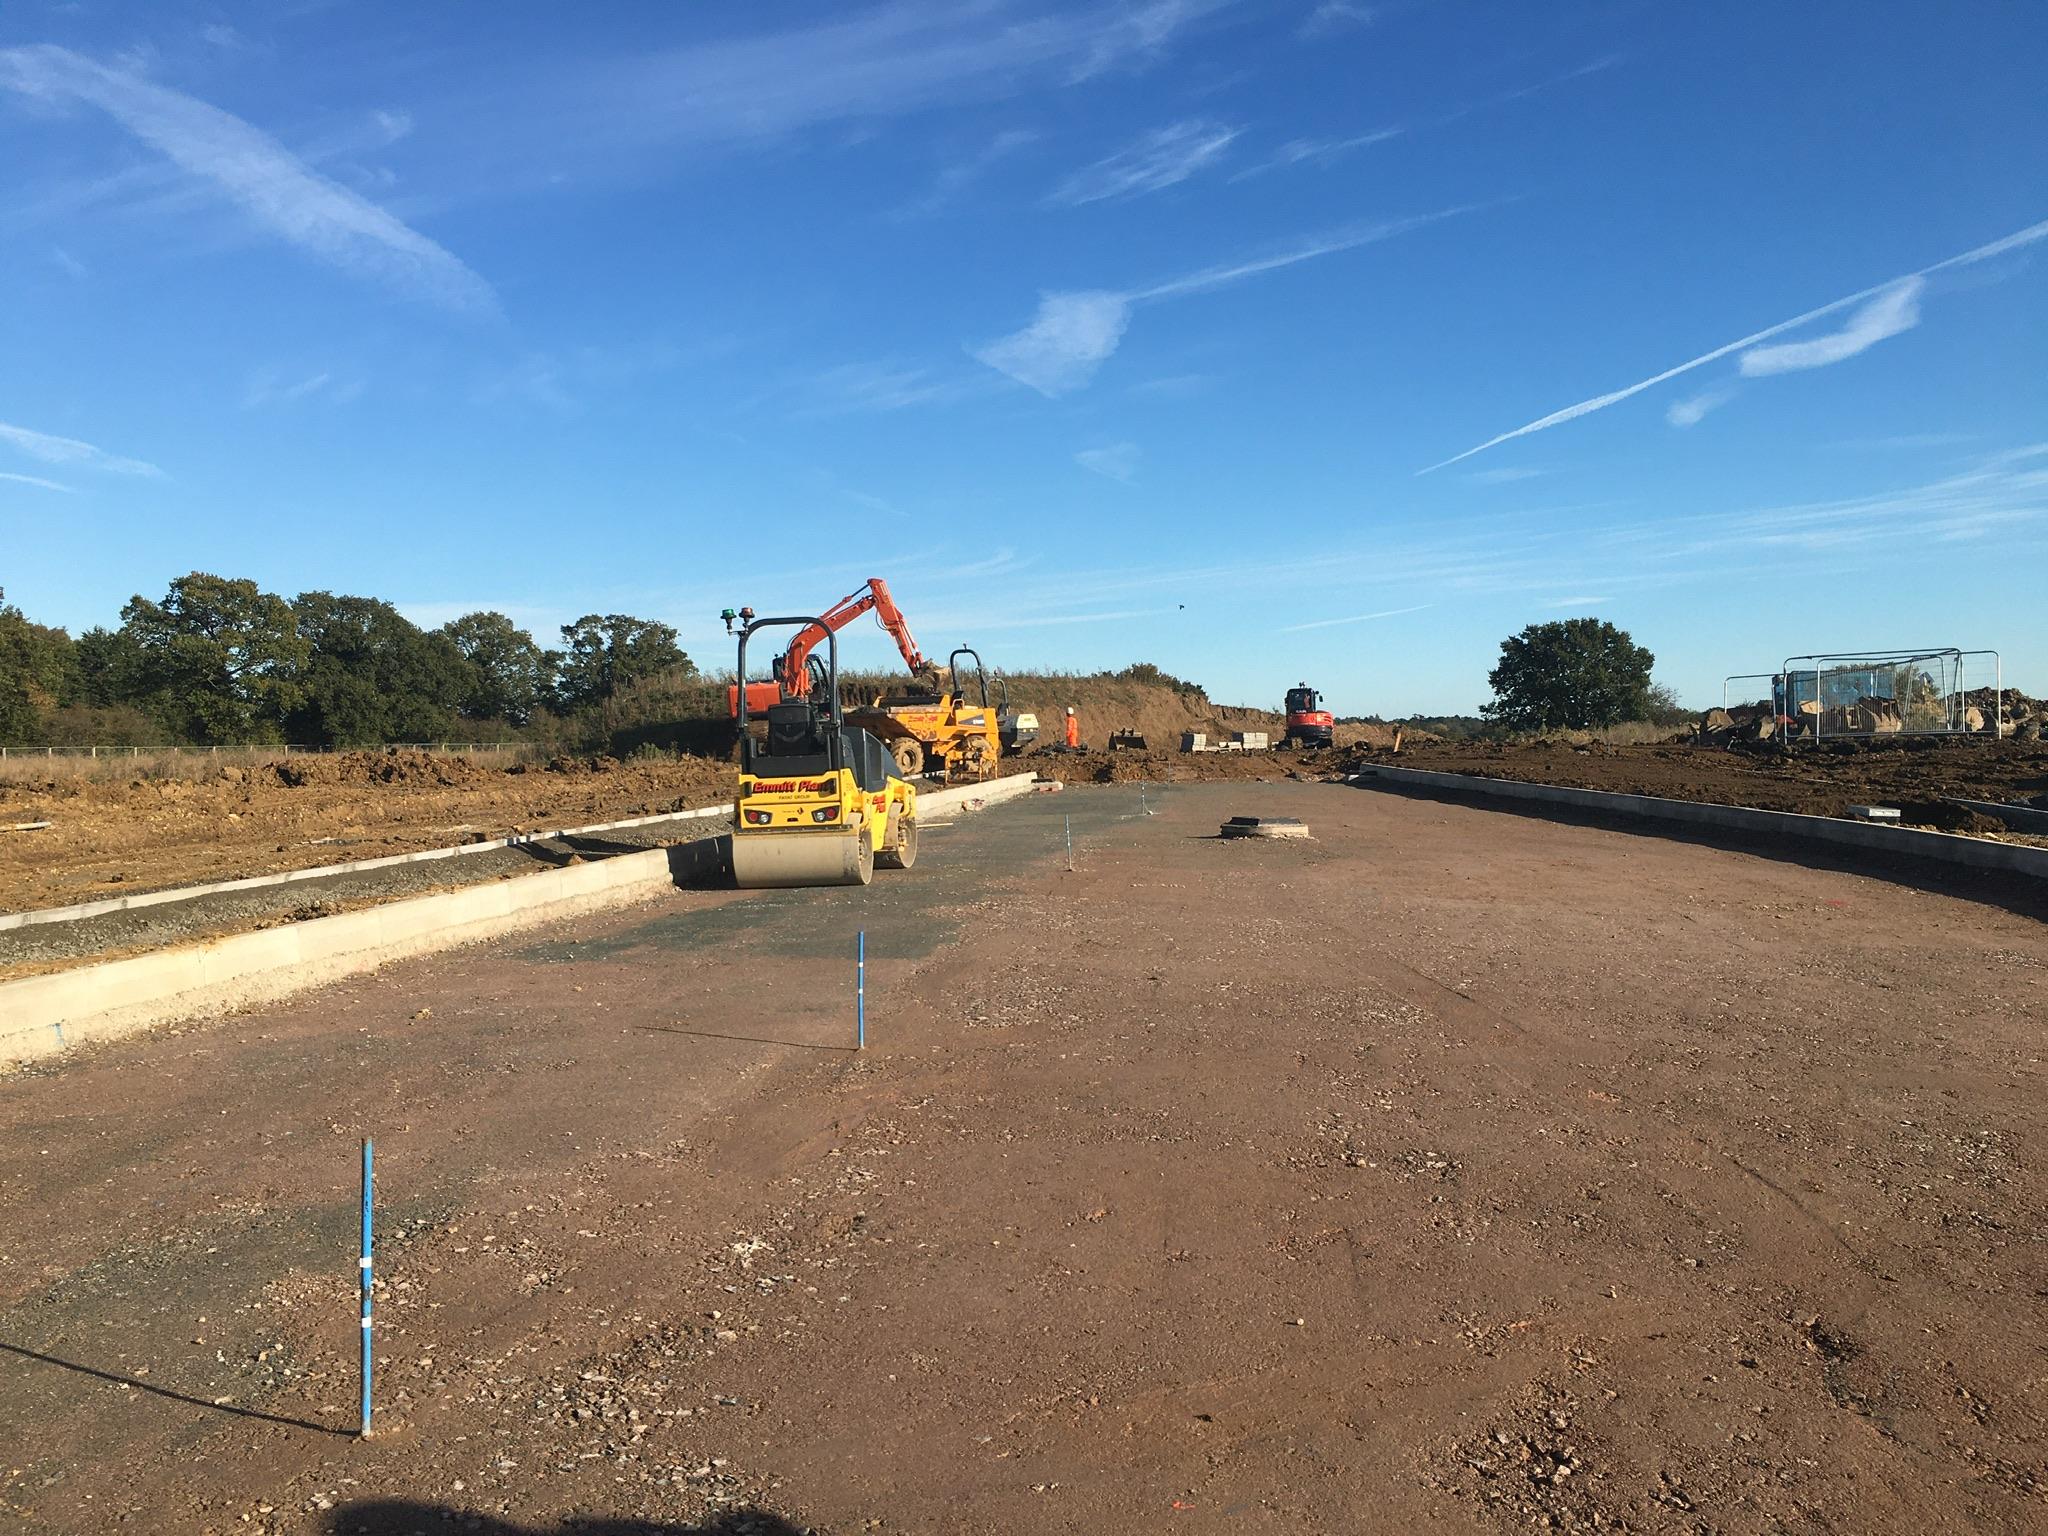 Construction of Northern Access and new Primary Road- Henley Gate, Ipswich Garden Suburb 5th Nov 2021